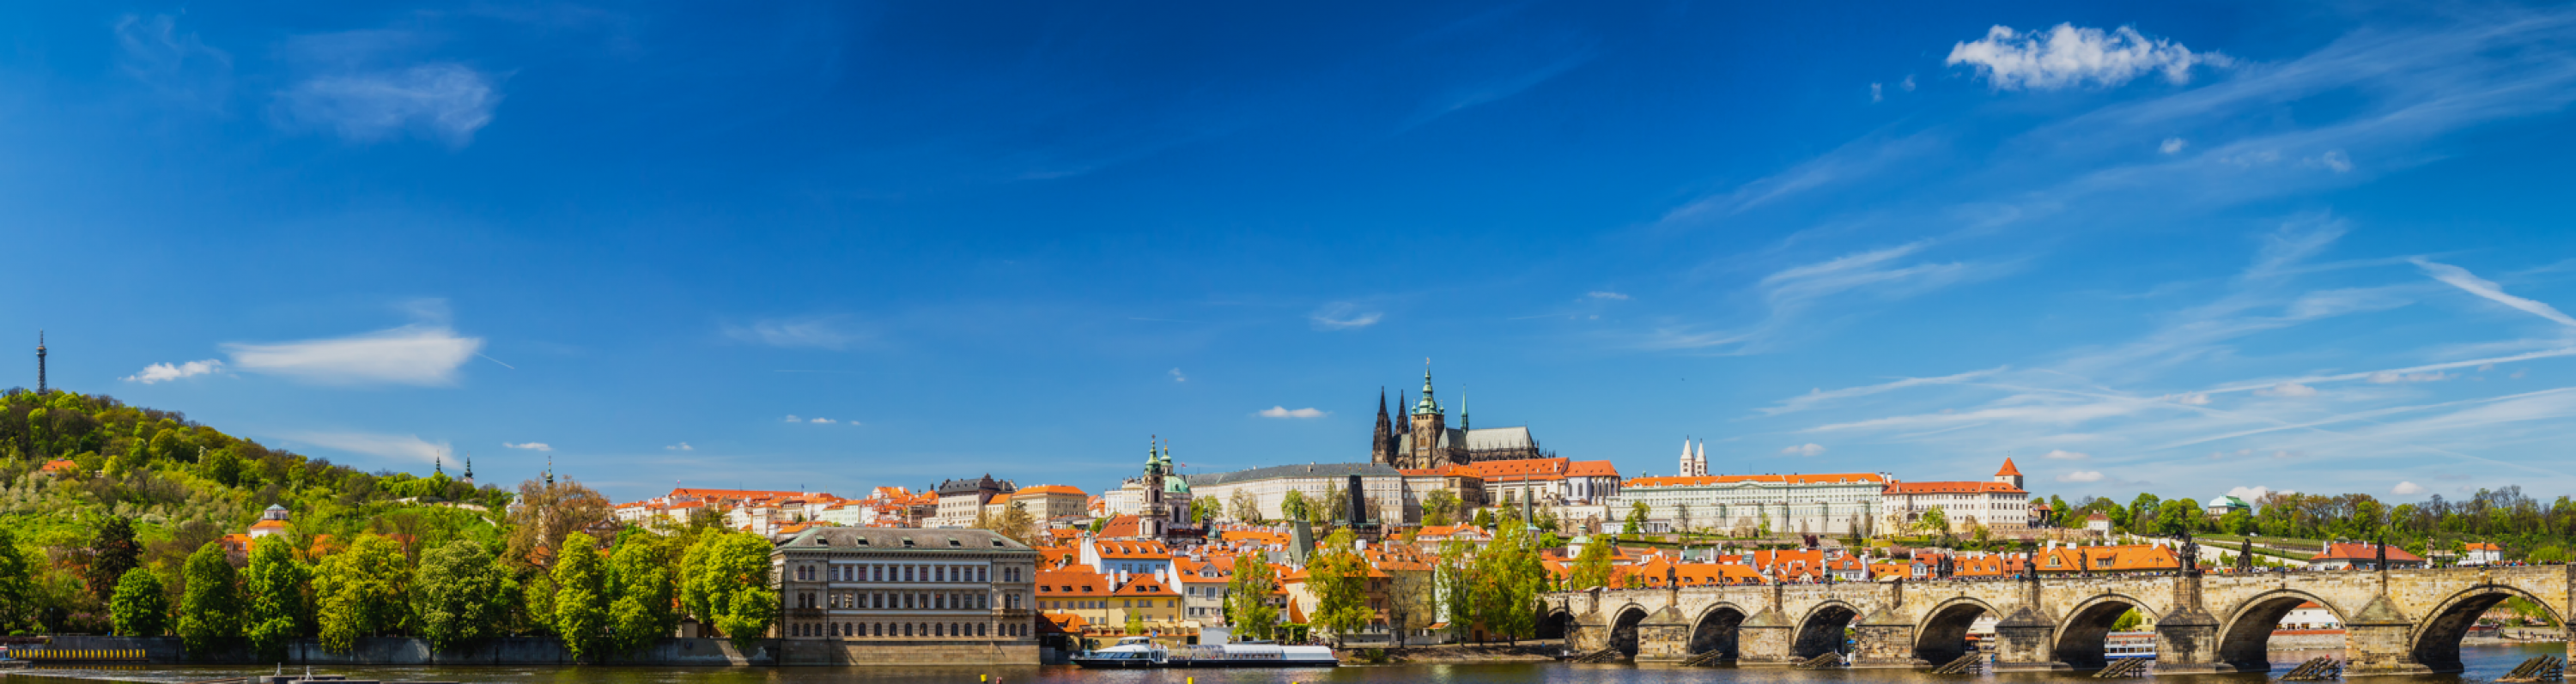 2nd Open Scientific Conference in Prague